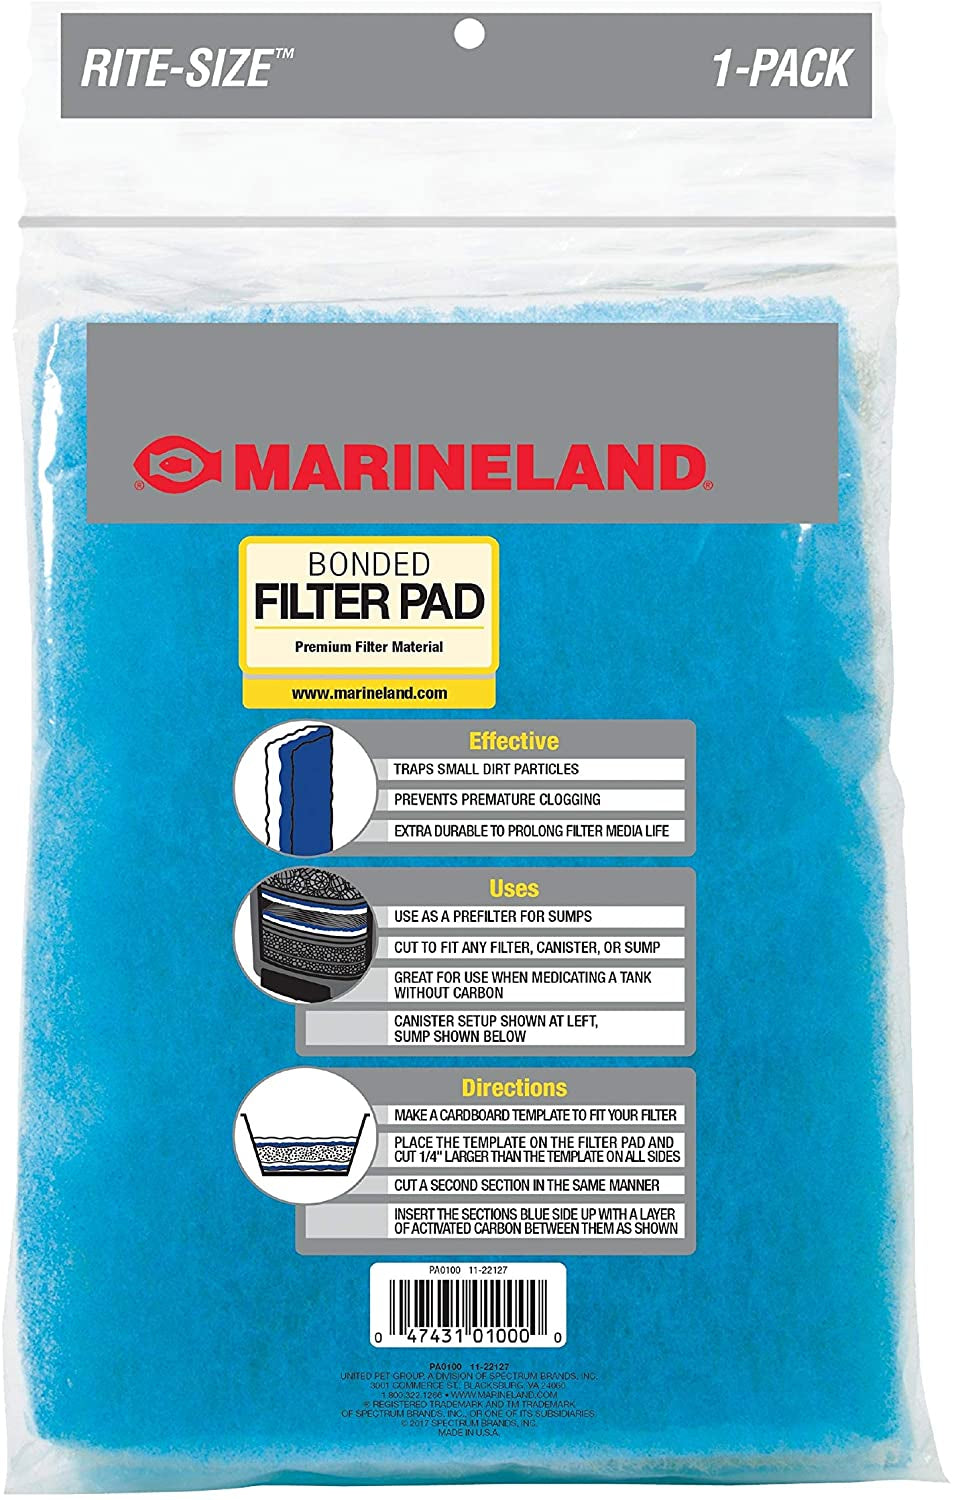 Marineland Rite-Size Bonded Filter Pad Aquariums For Beginners